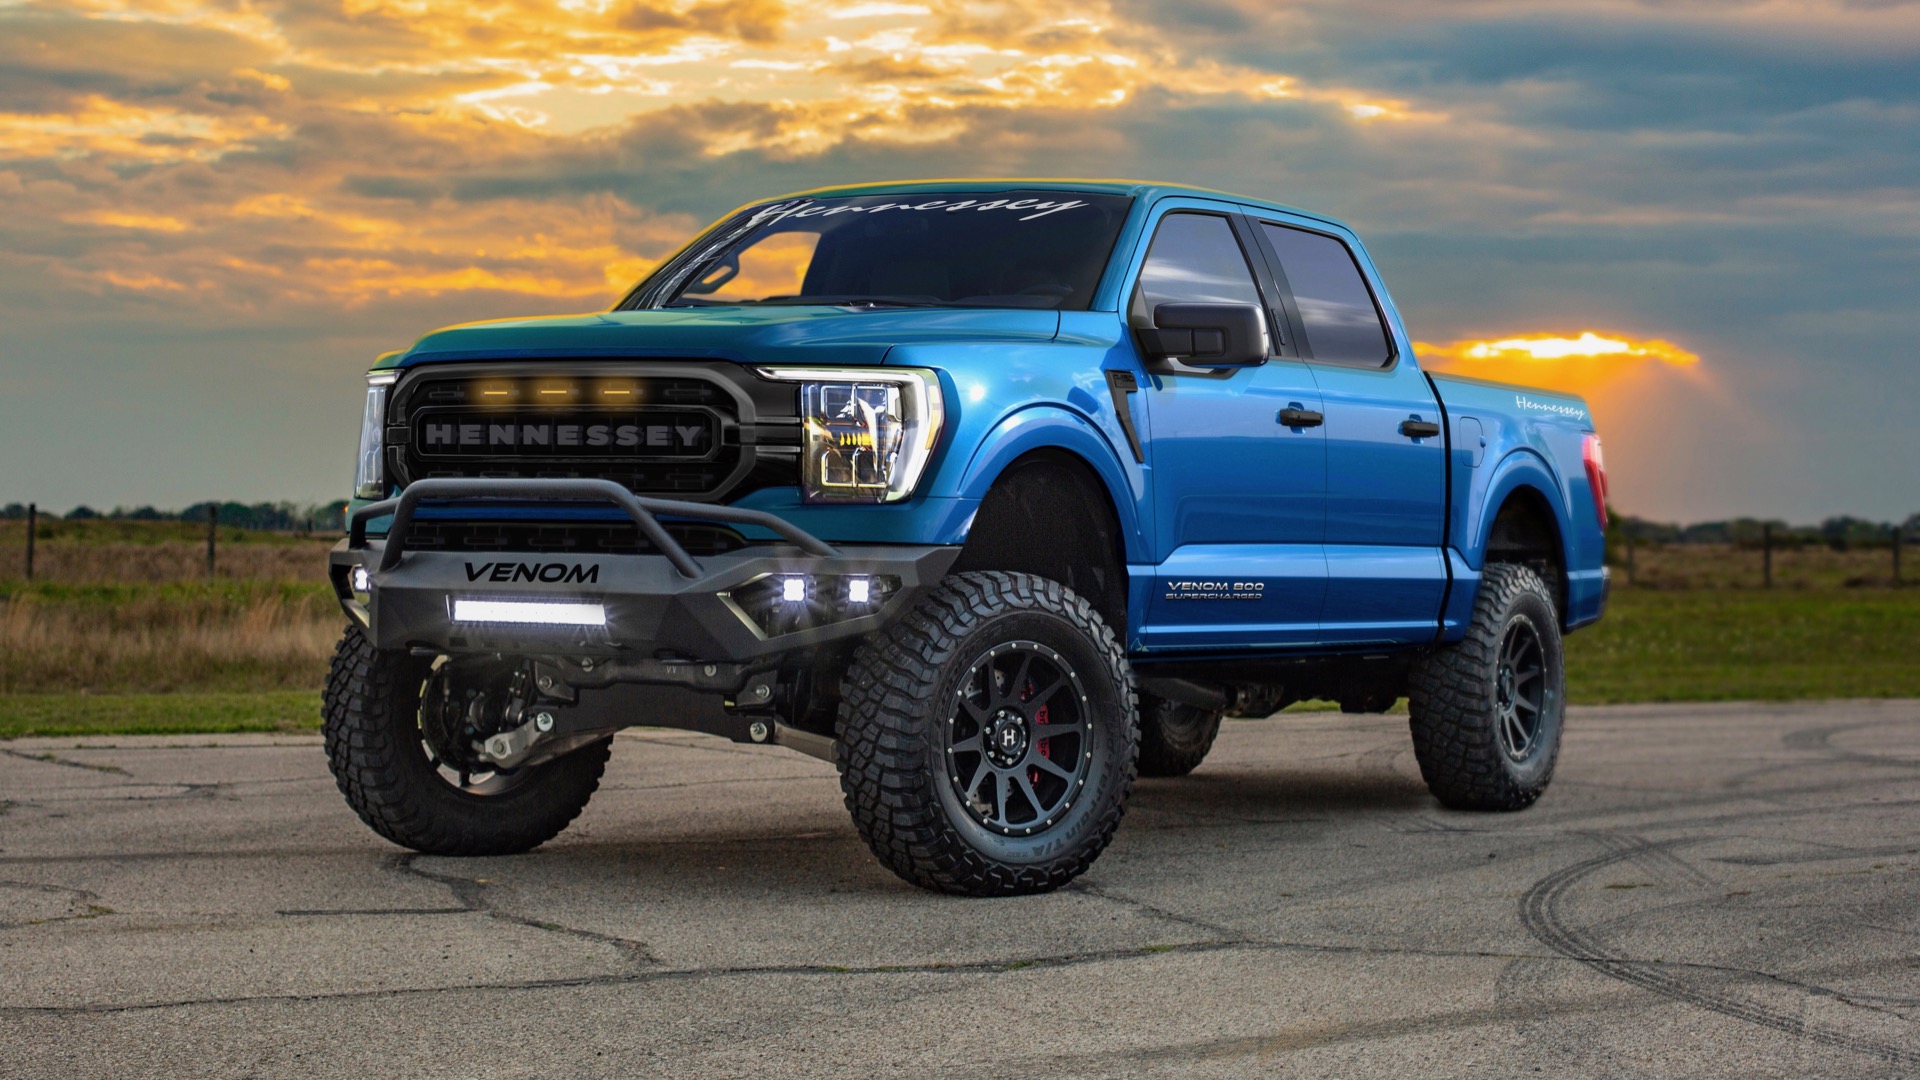 2021 Ford F-150-based Hennessey Venom 800 Supercharged goals to greatest the Ram 1500 TRX Auto Recent